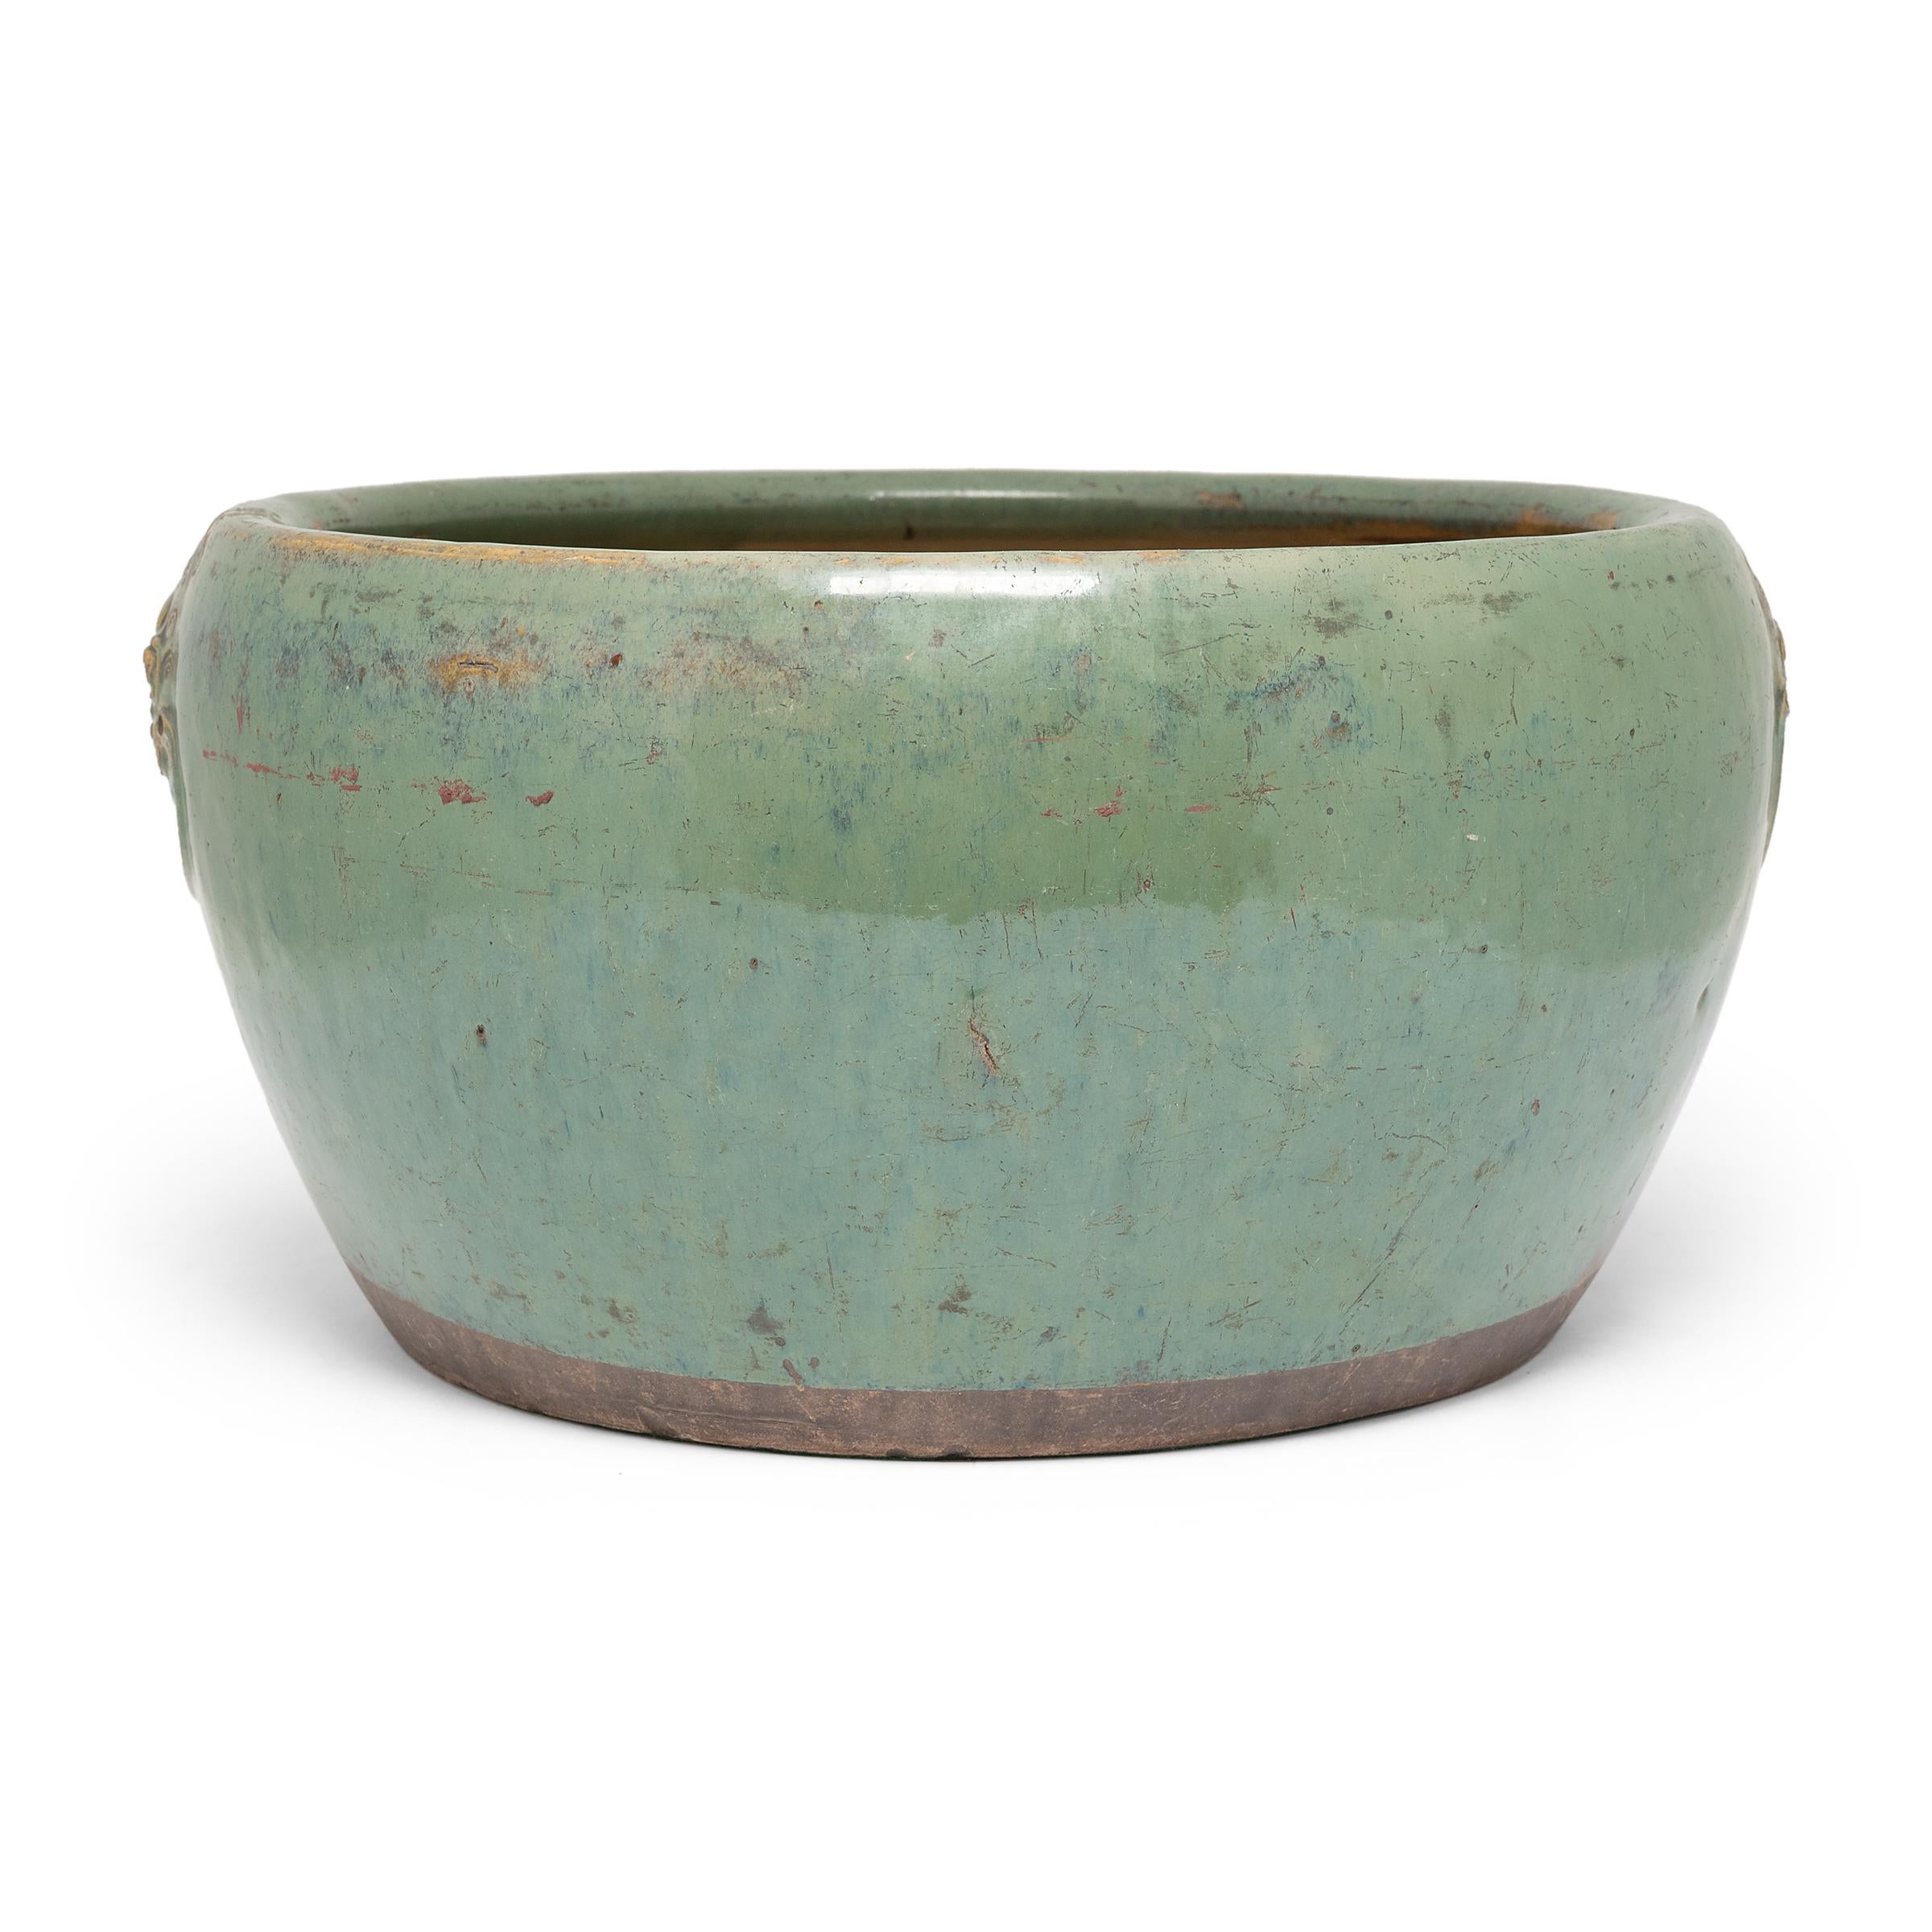 This low ceramic planter dates to the mid-19th century and was likely originally used as an indoor fishbowl. The basin has a round 